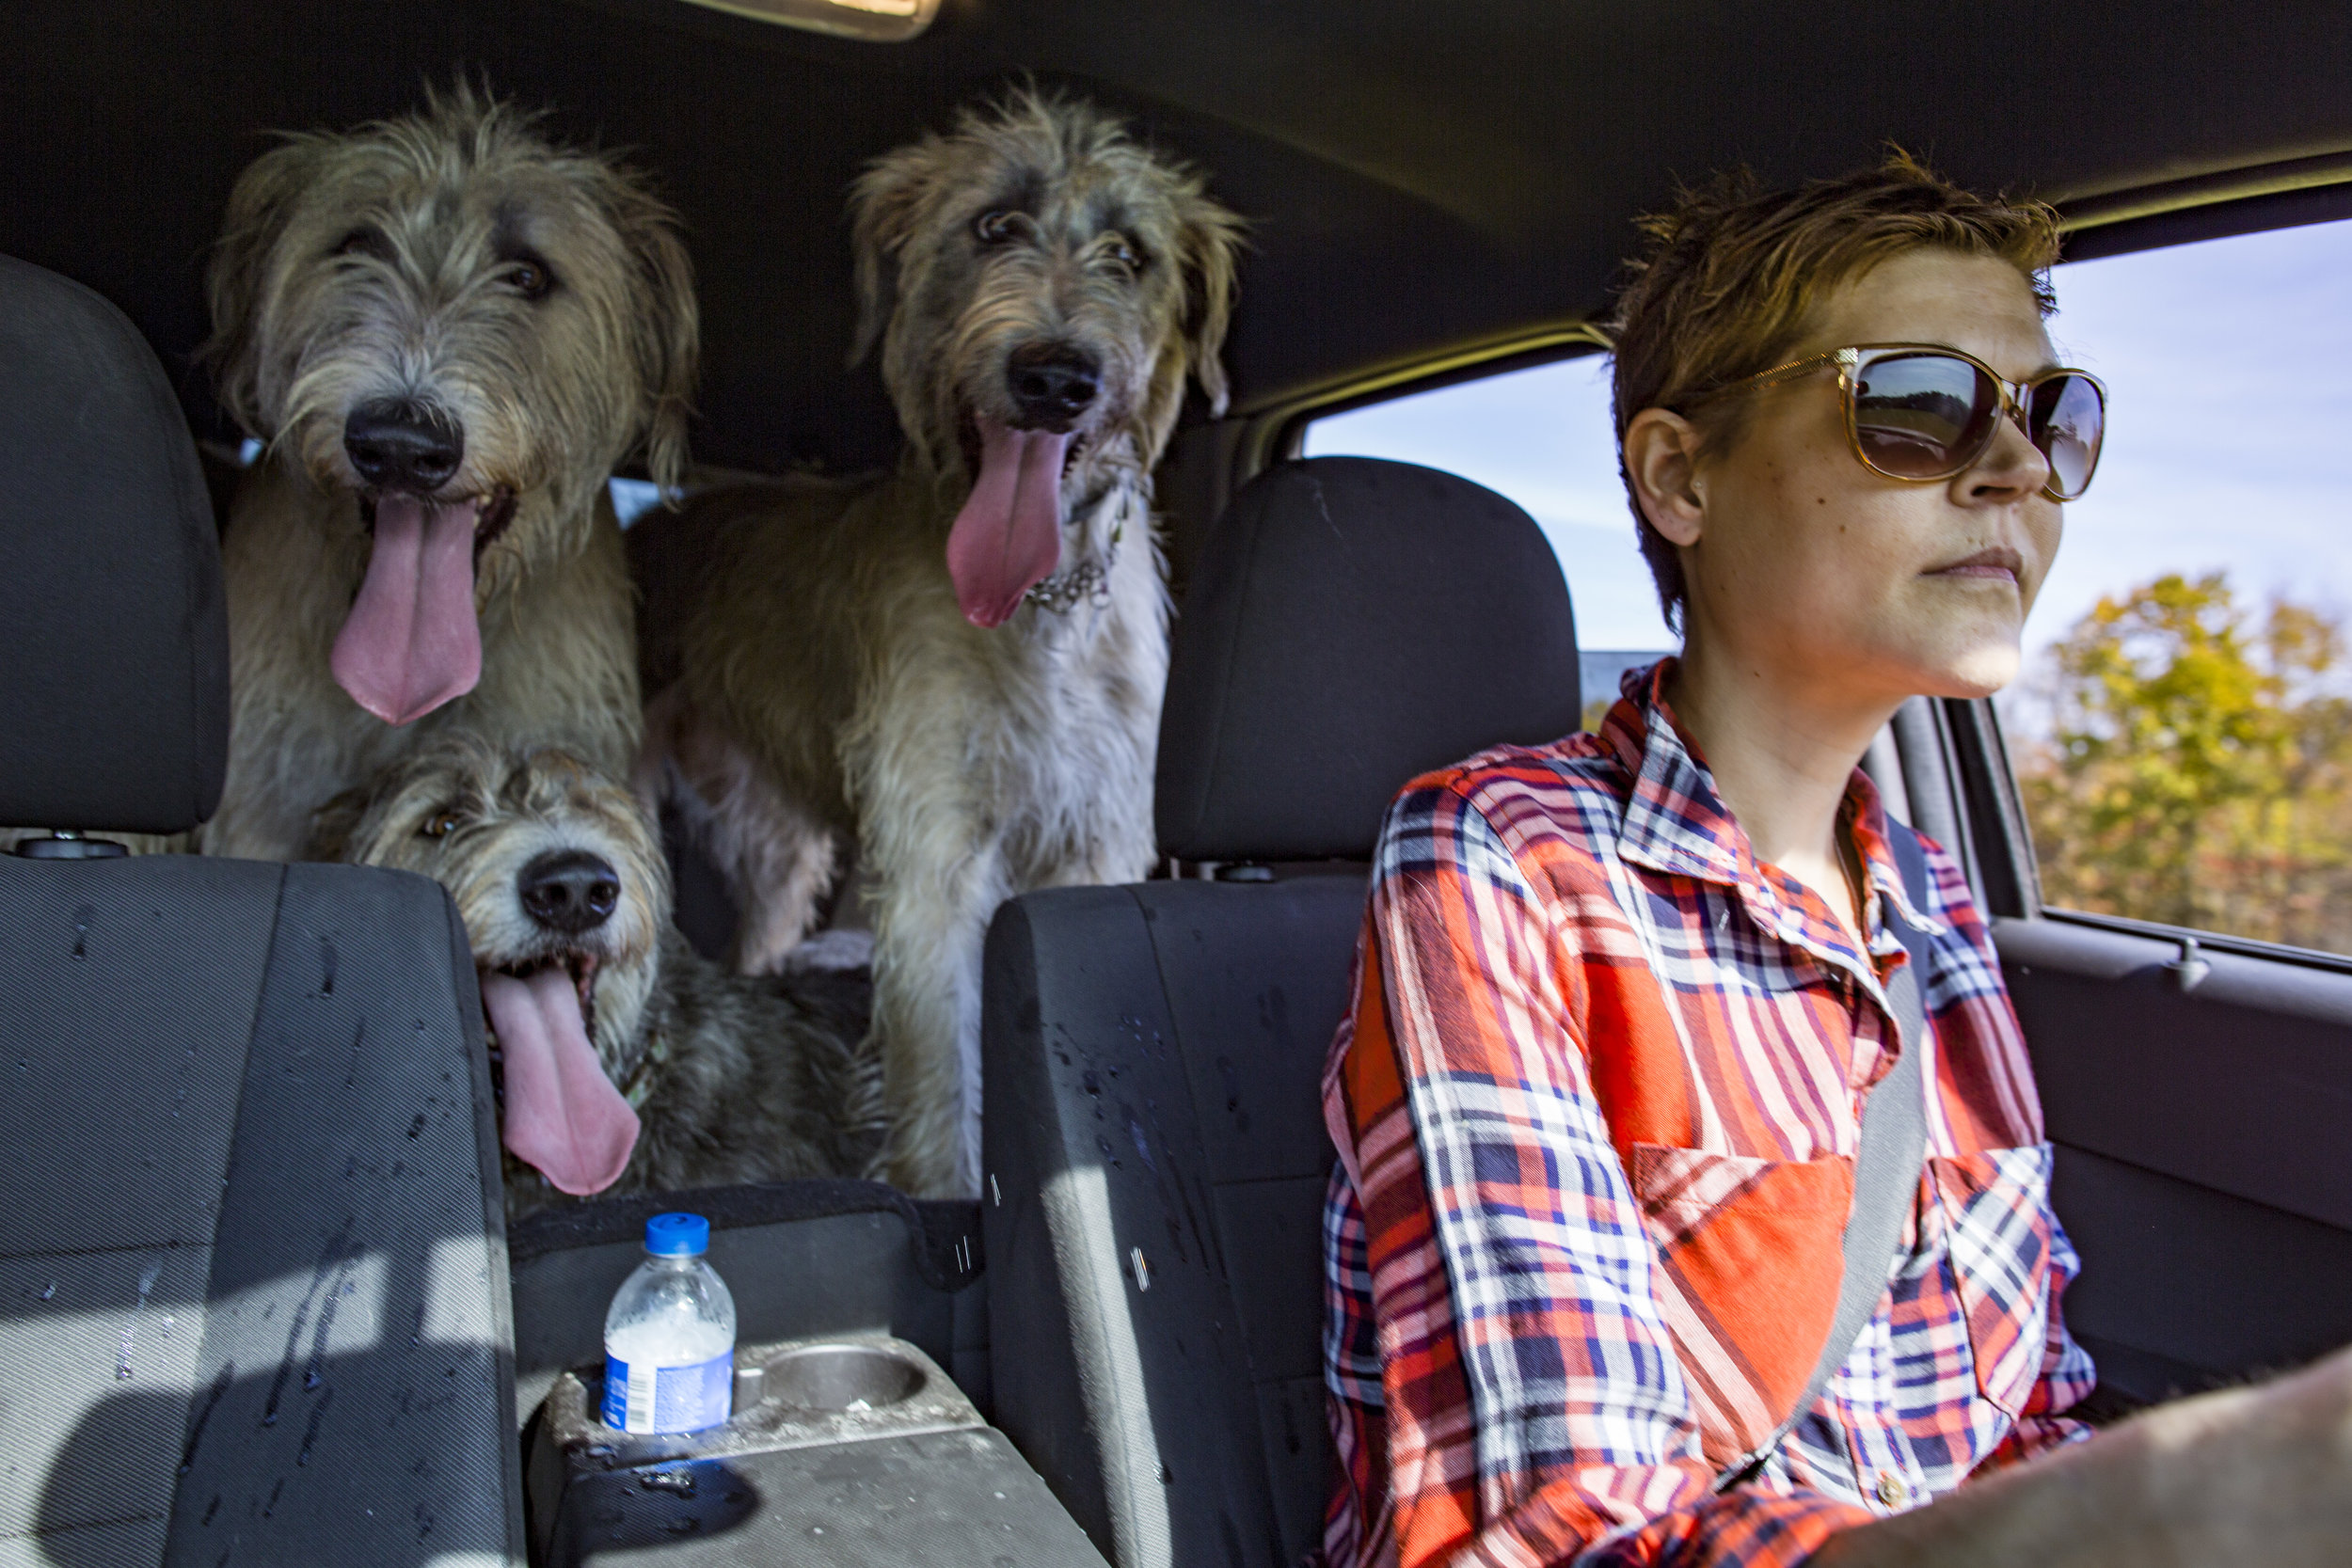  Cat L’Heureux drives her dogs, Walter, Dani and Tom, to her mom’s house after walking them on the farm in Athens, Ohio on October 22, 2015. 